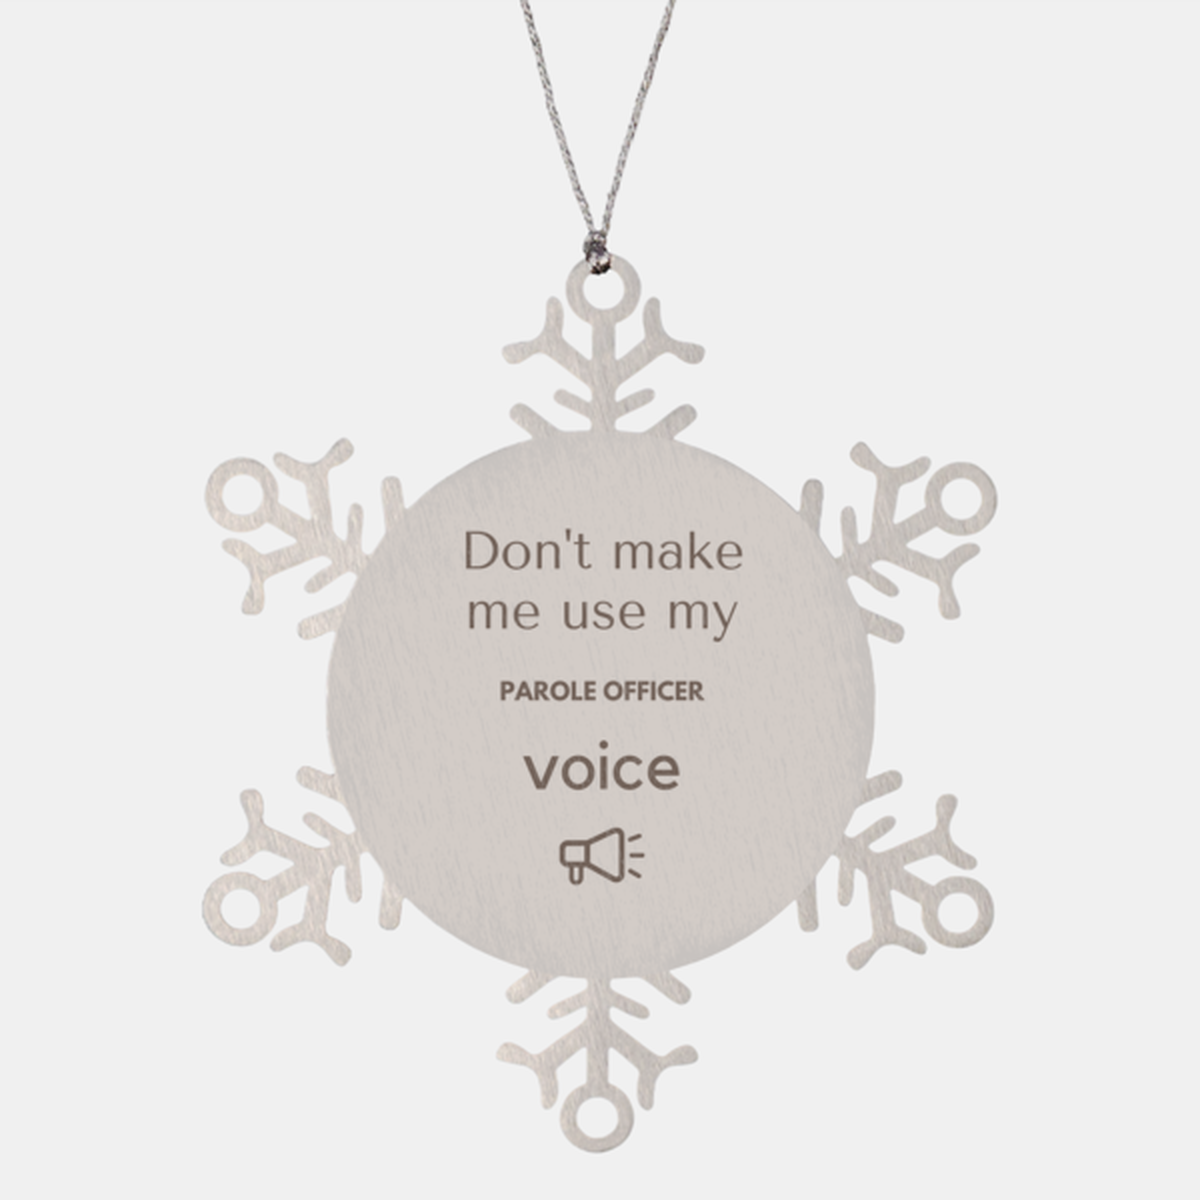 Don't make me use my Parole Officer voice, Sarcasm Parole Officer Ornament Gifts, Christmas Parole Officer Snowflake Ornament Unique Gifts For Parole Officer Coworkers, Men, Women, Colleague, Friends